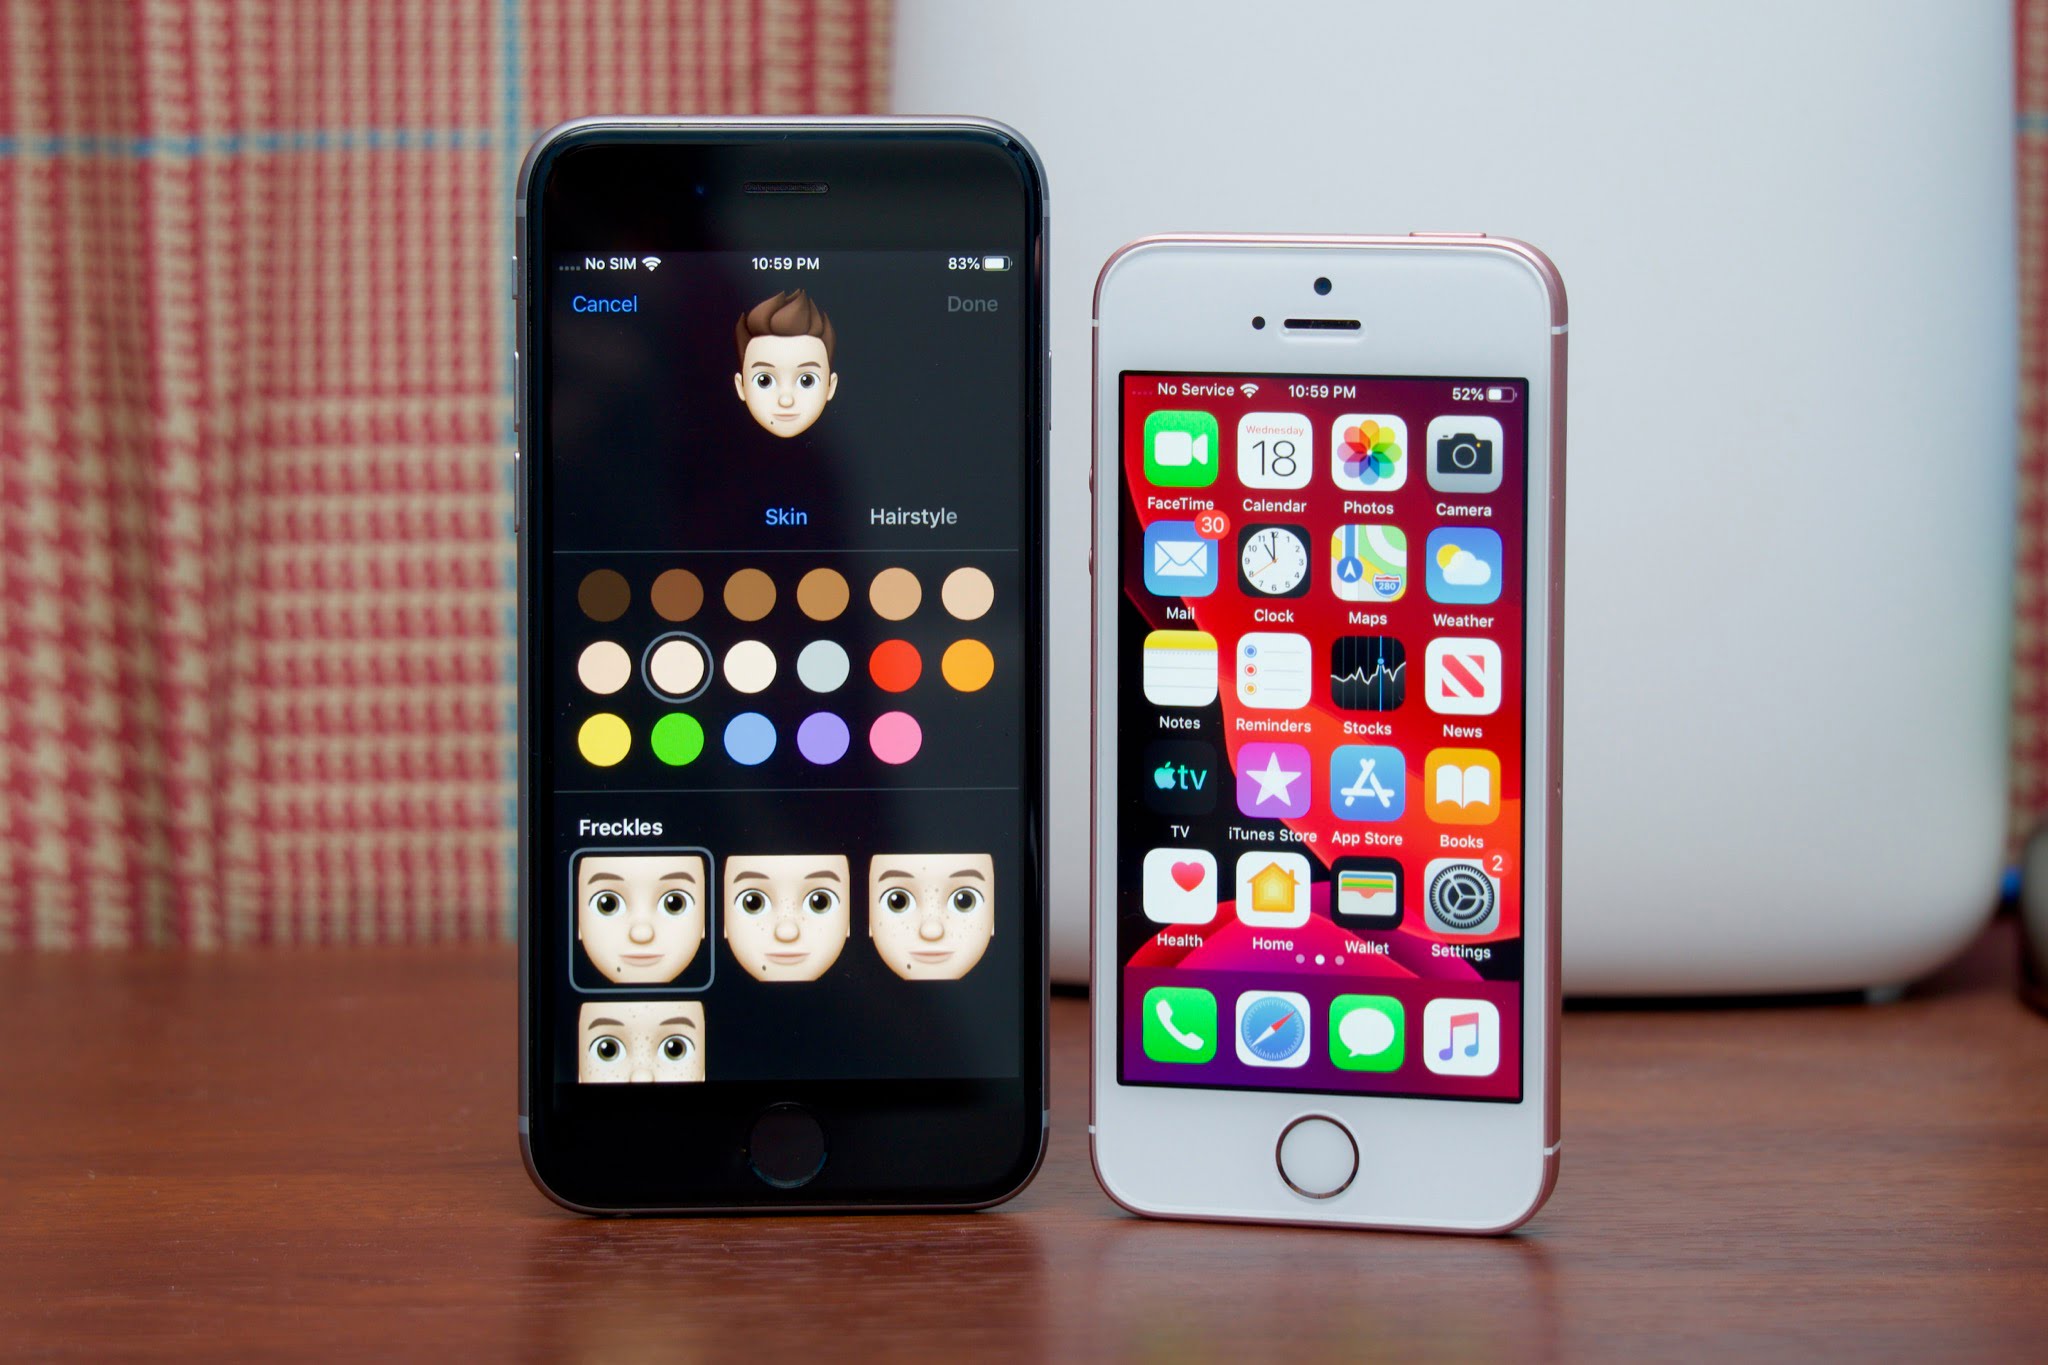 iOS 15 will not be compatible with the iPhone 6s and the original iPhone SE